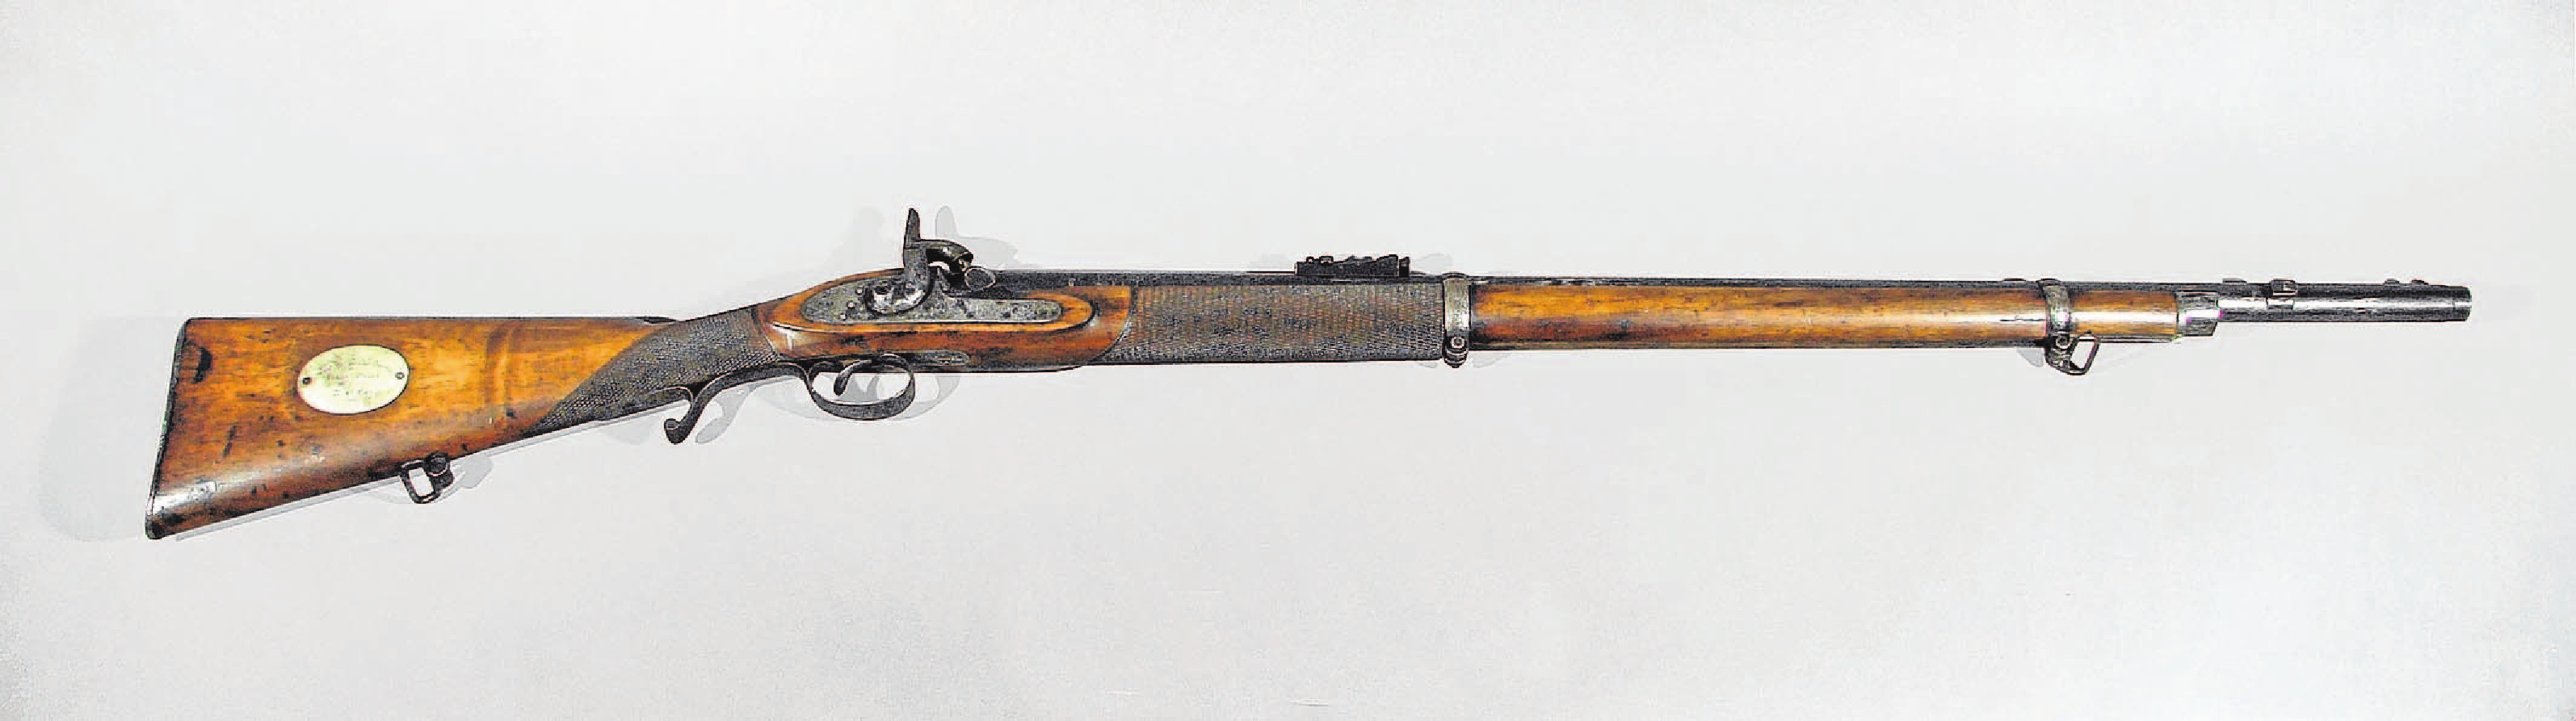 Alfred Cox’s prize rifle. Photo: collection of Toitū Otago Settlers Museum [1932/9/1-1, the rifle]